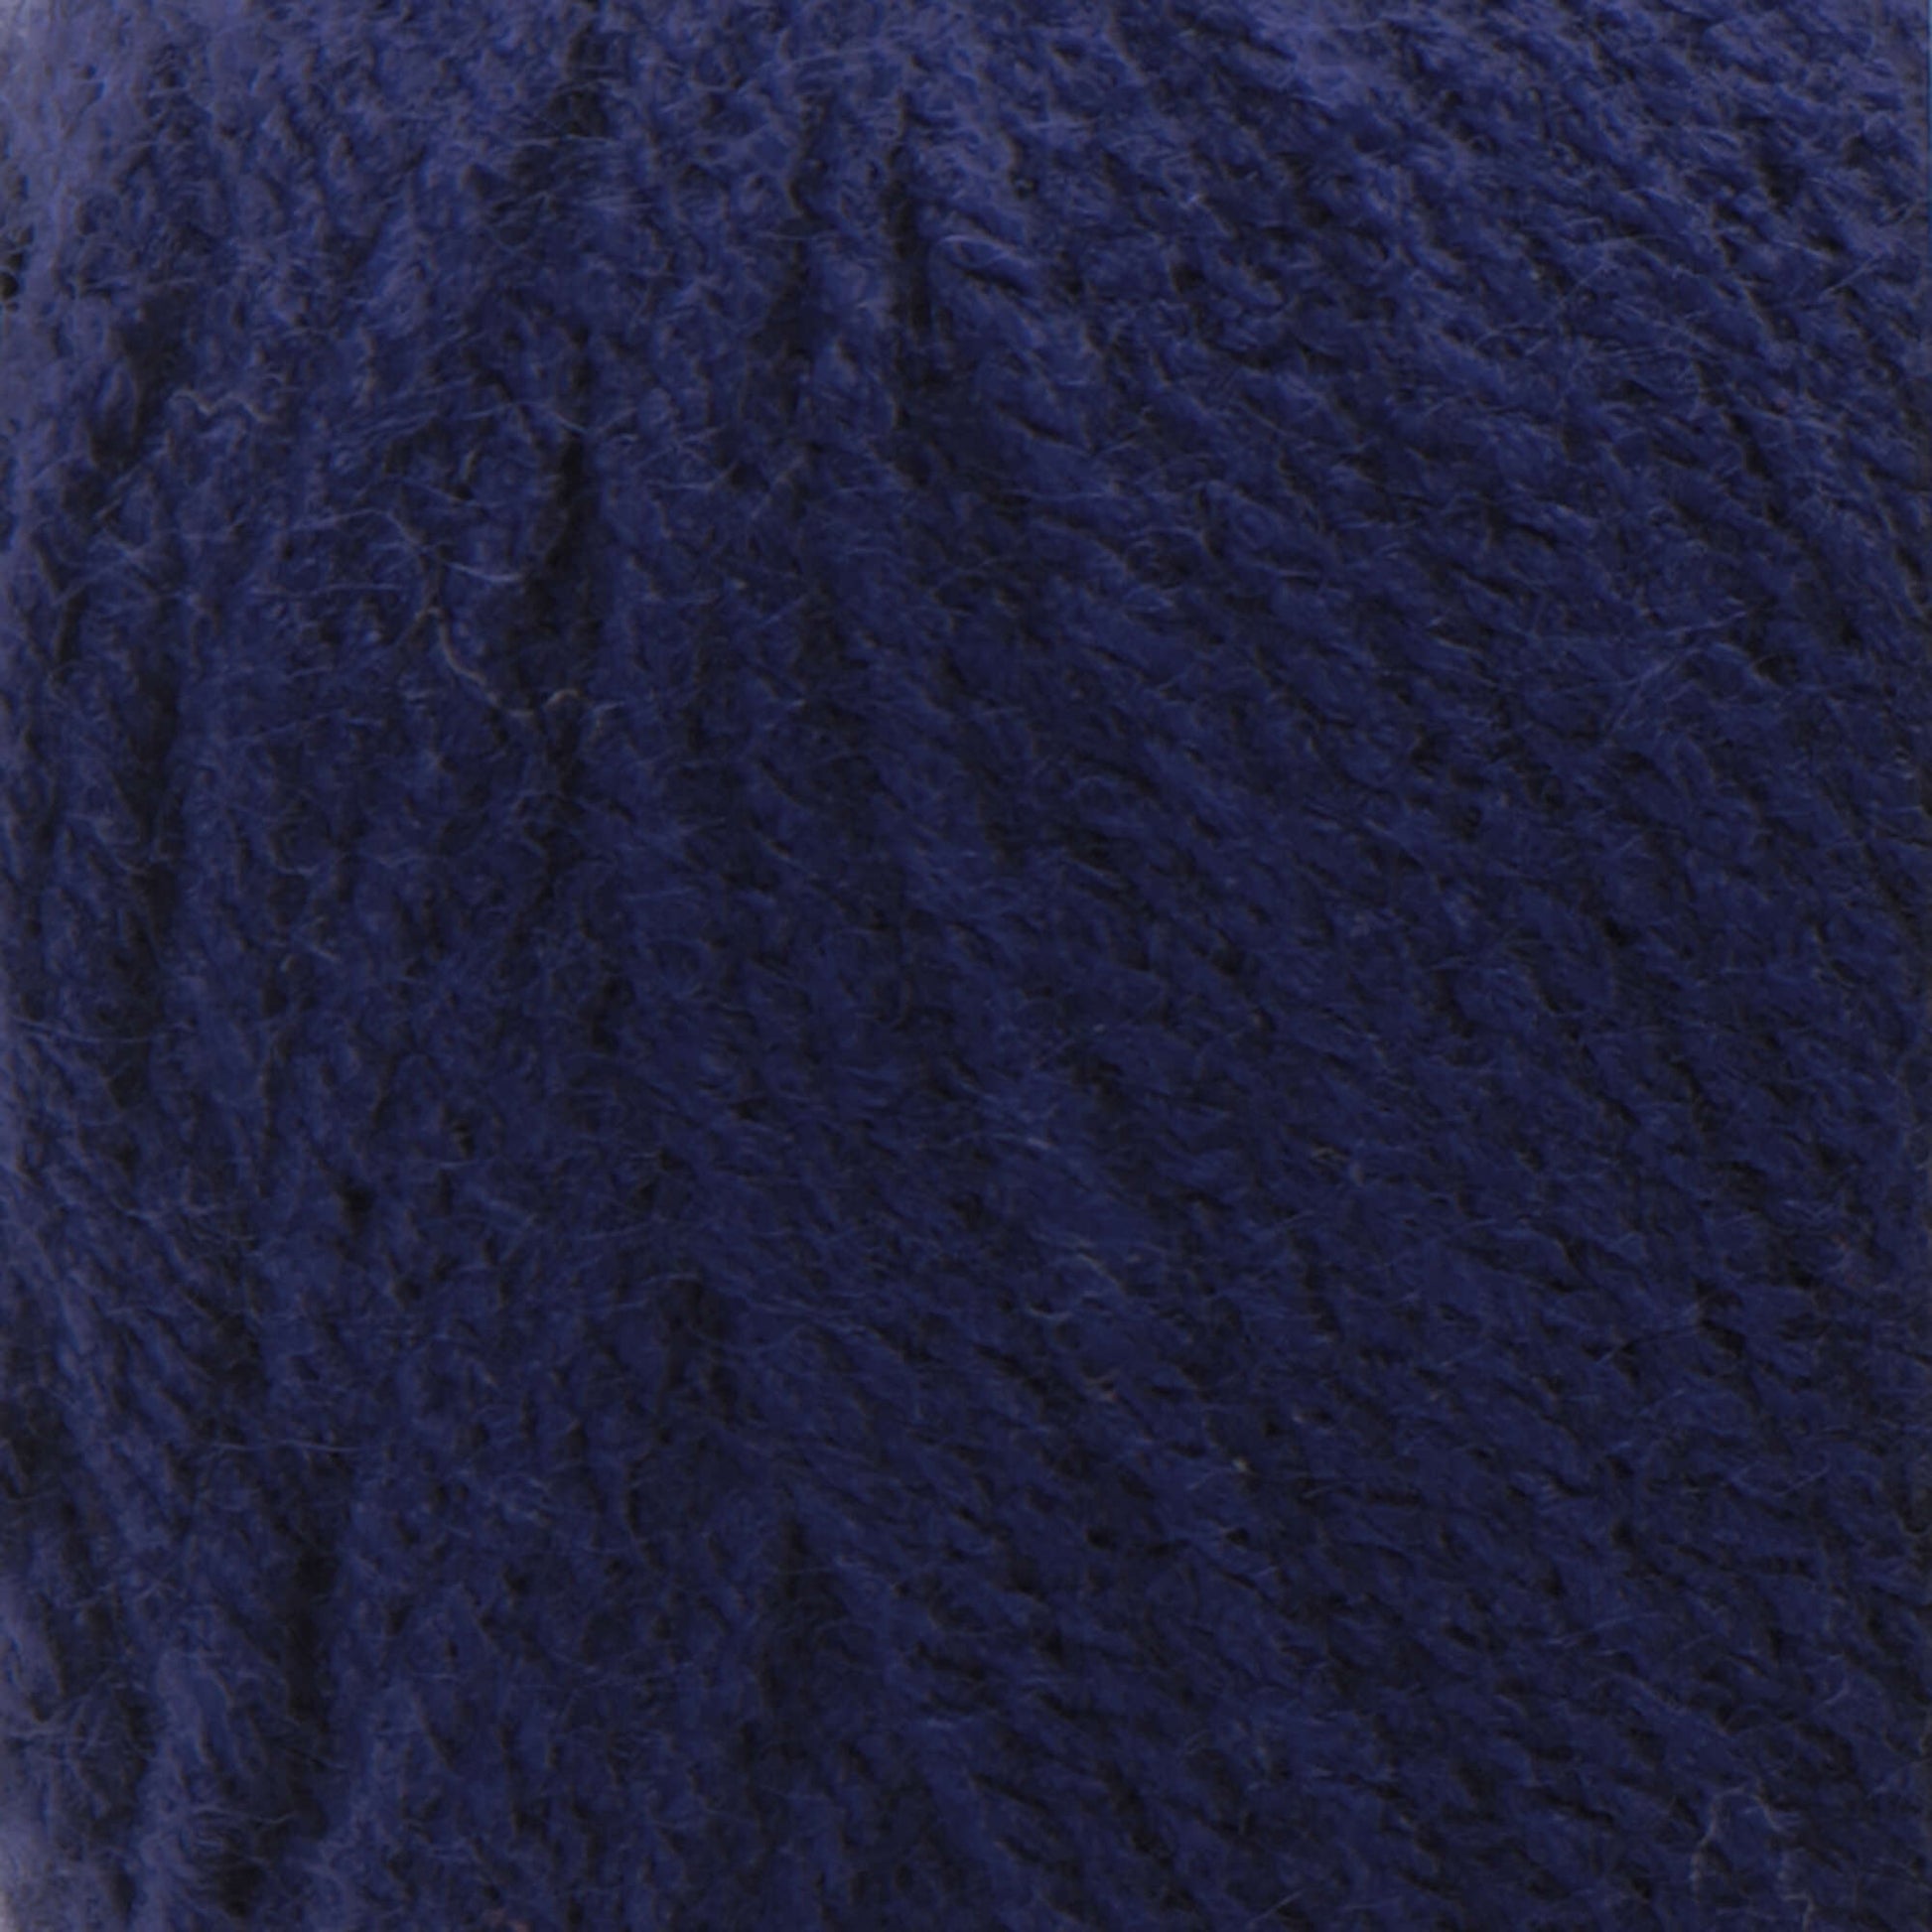 Red Heart Classic Yarn - Clearance shades Soft Navy